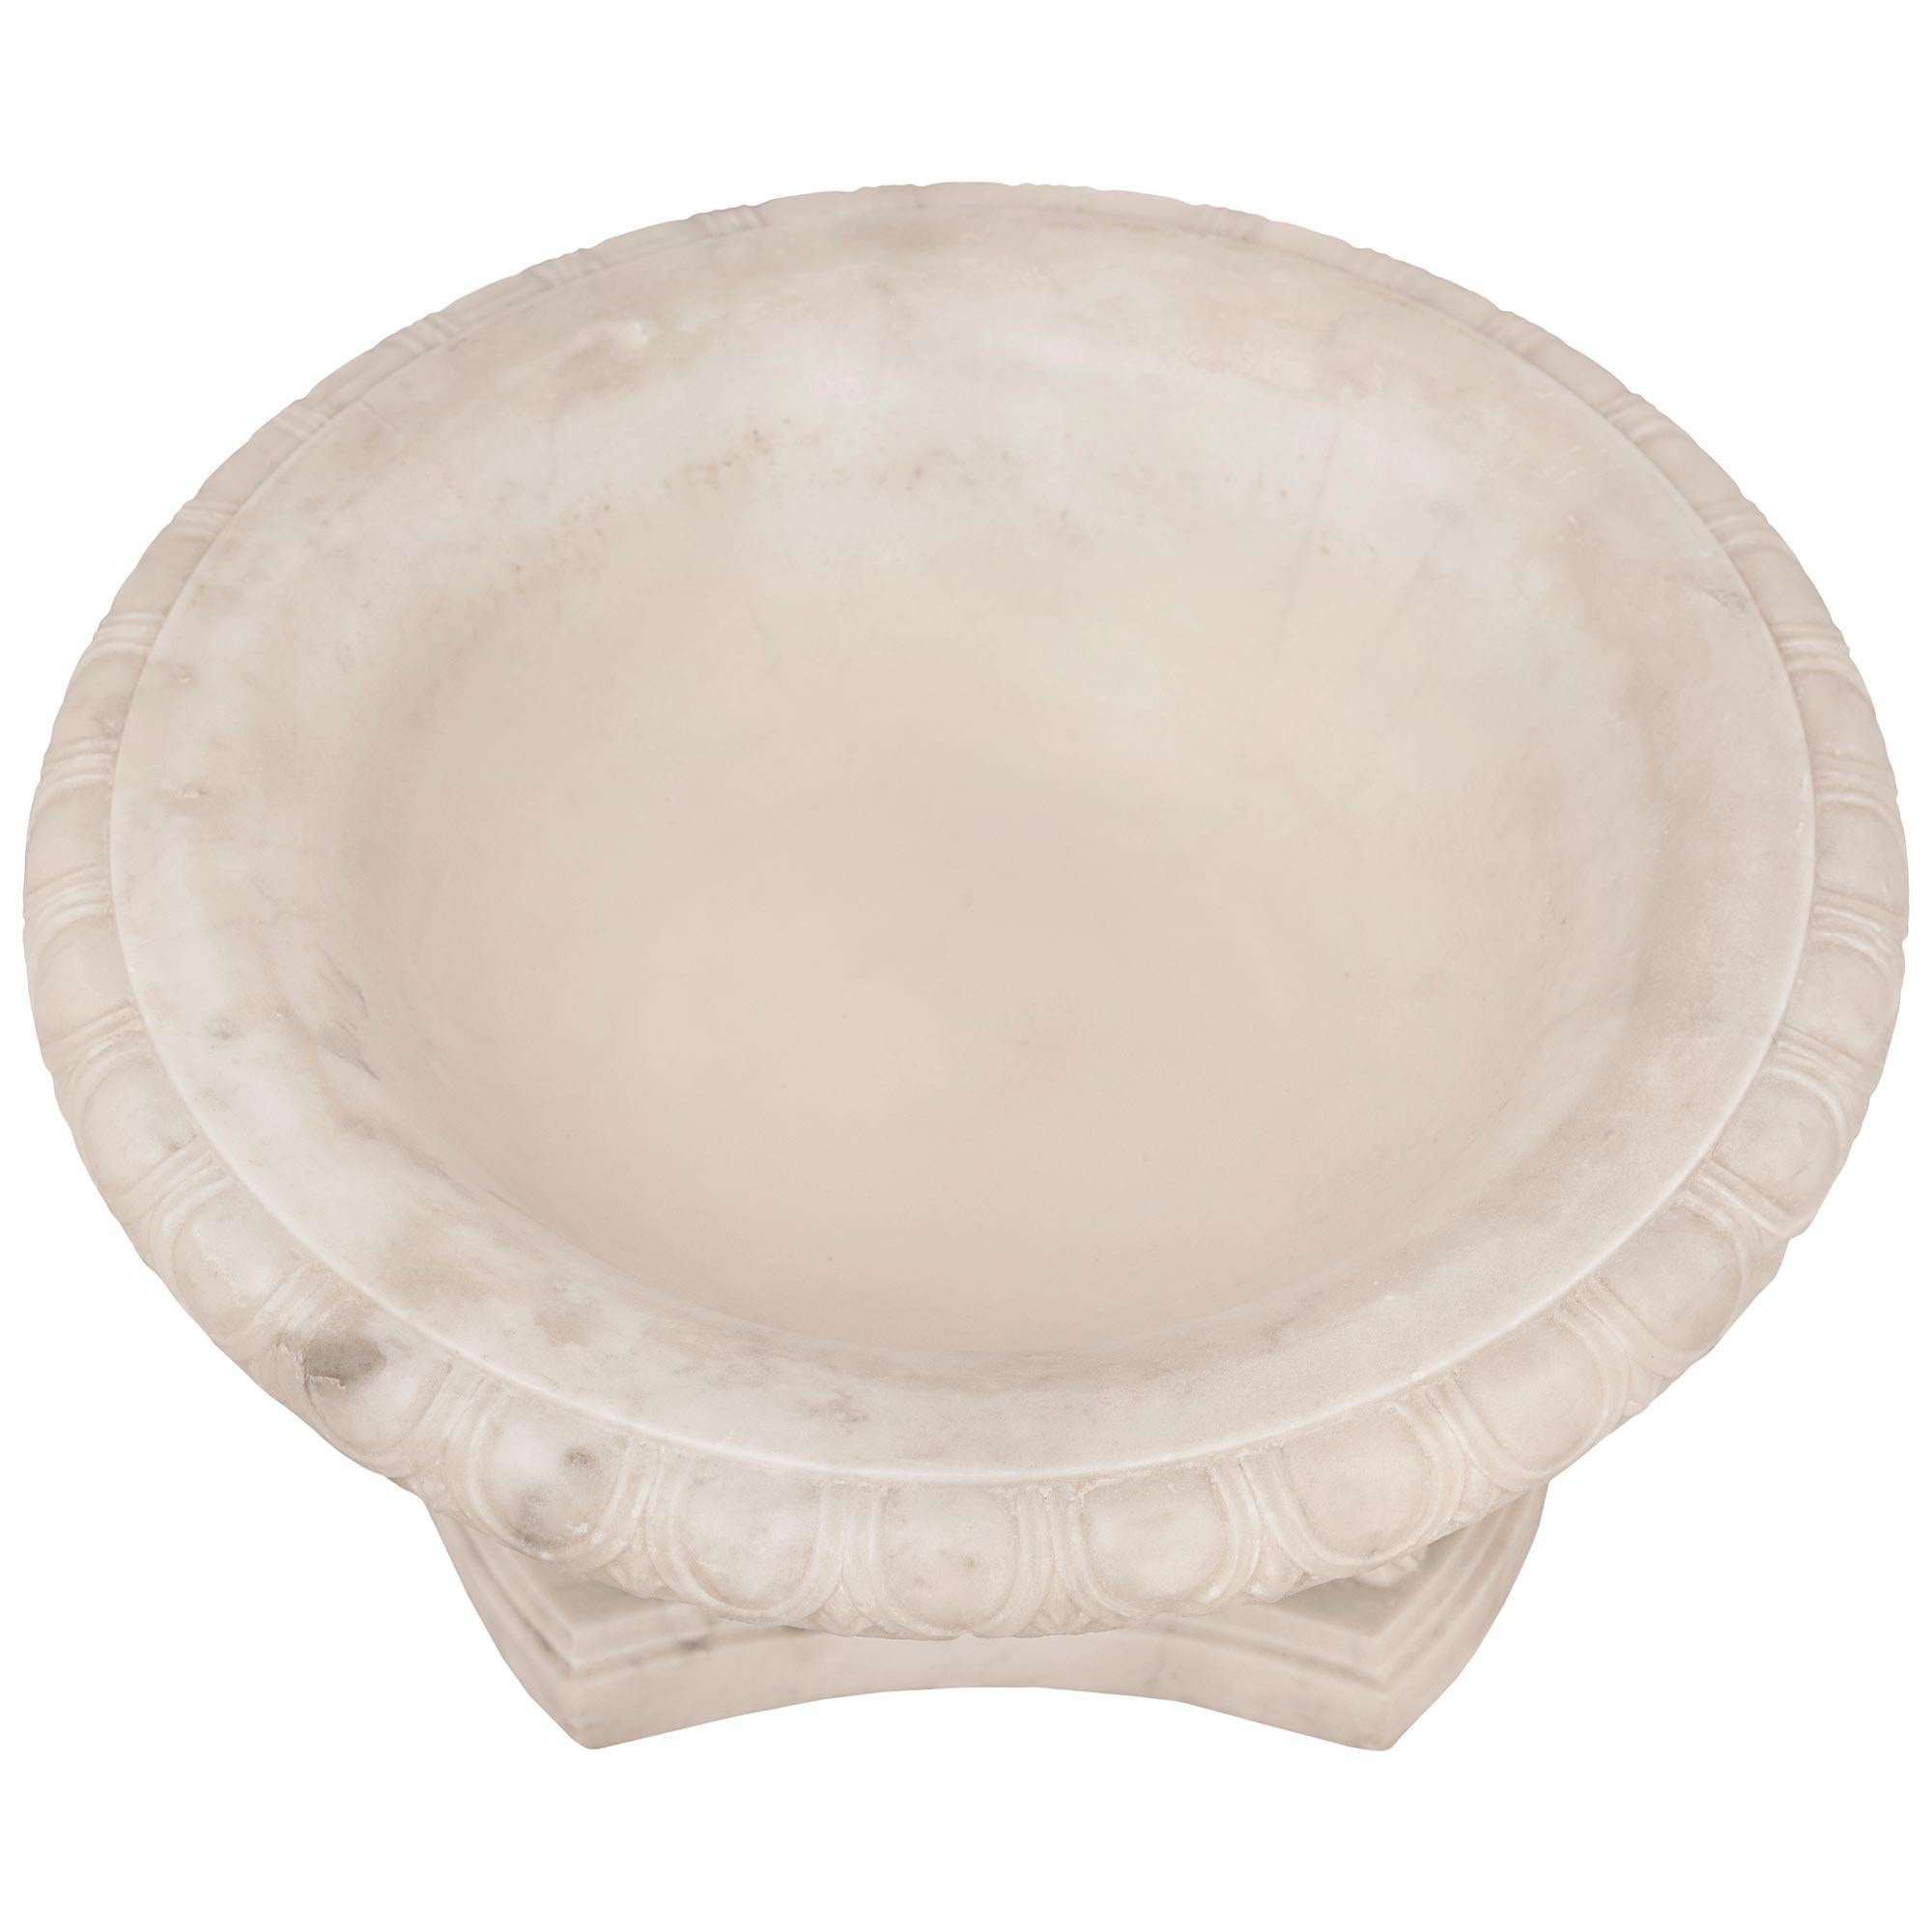 A striking and high quality Italian 19th century Neo-Classical st. white Carrara marble centerpiece bowl. The bowl is raised by a triangular base with concave sides, cut corners and a fine wrap around double mottled border. Three handsome richly